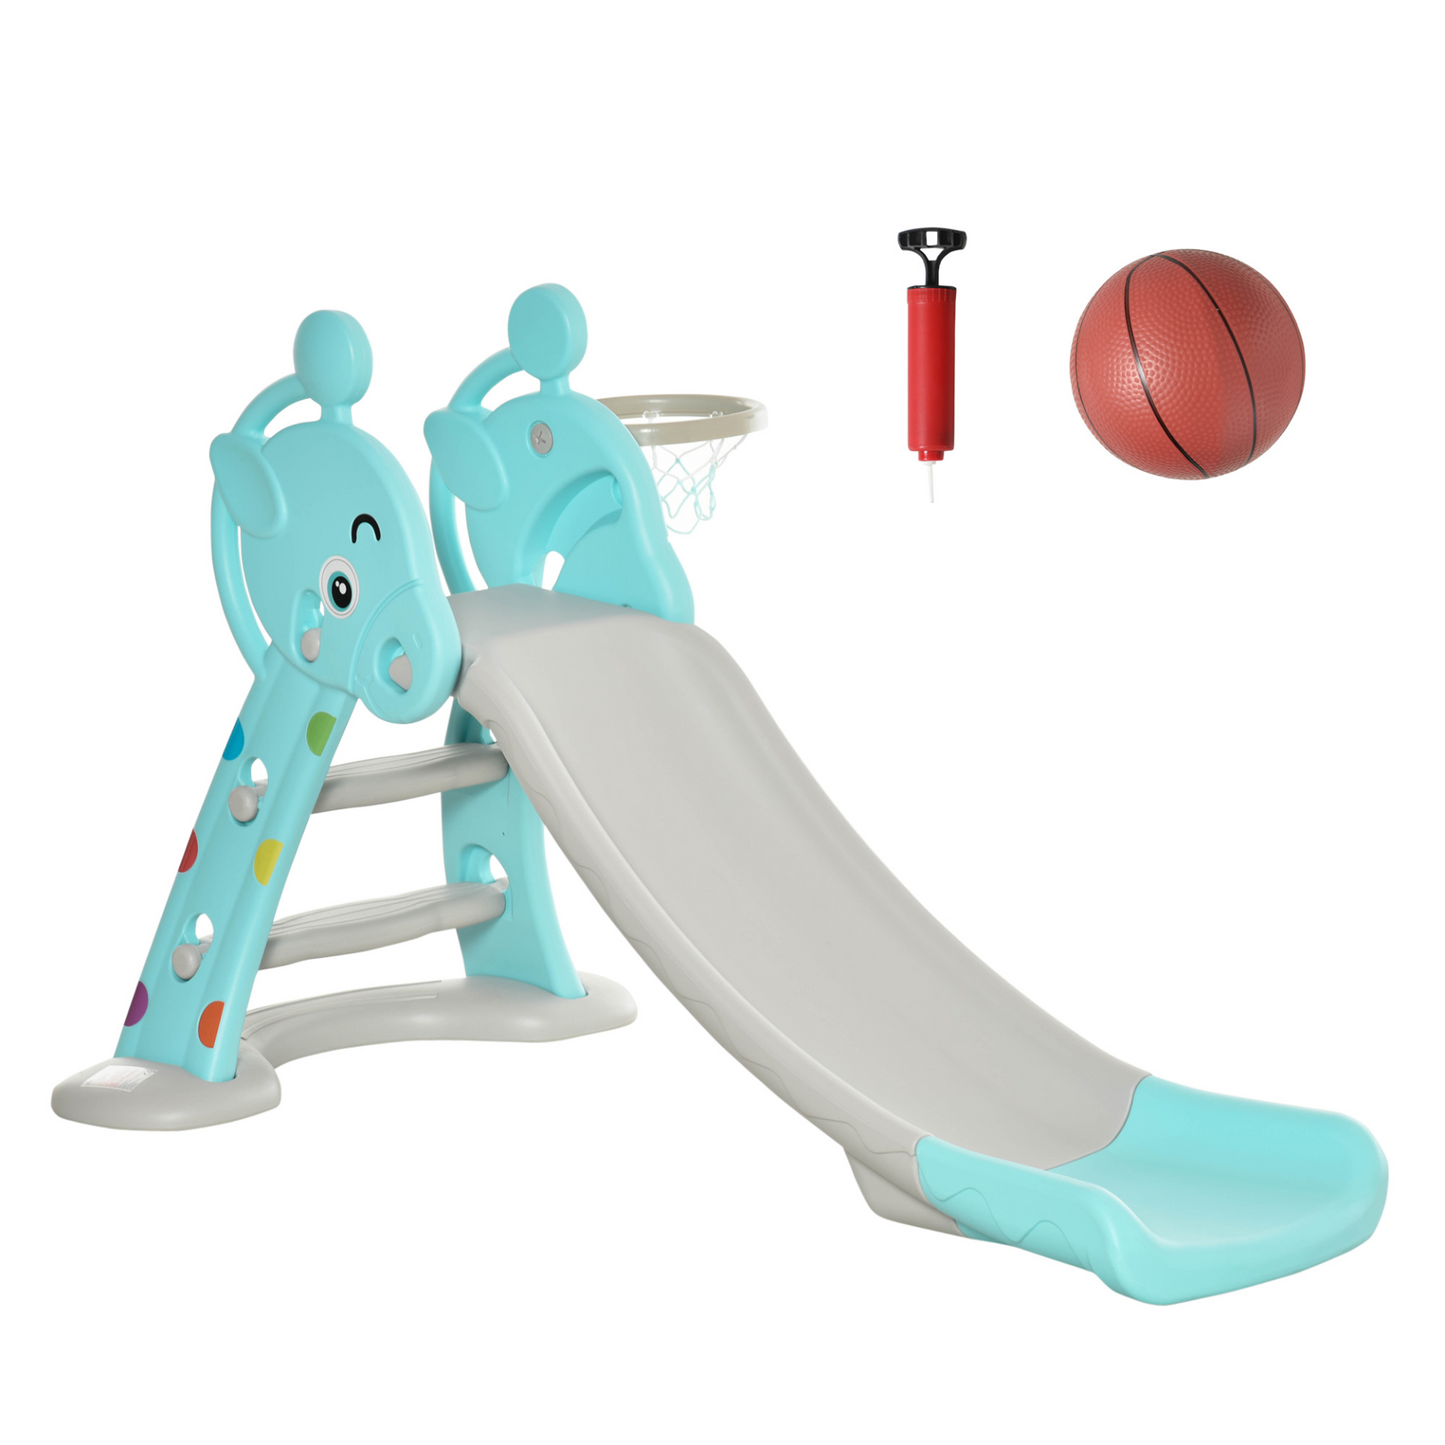 HOMCOM 2 in 1 Kids Slide with Basketball Hoop Toddler Freestanding Slider Playset for Indoor/Outdoor Use Slipping Climber Playground Equipment Set Exercise Toy 18 months -4 Years Old Deer Shaped Blue